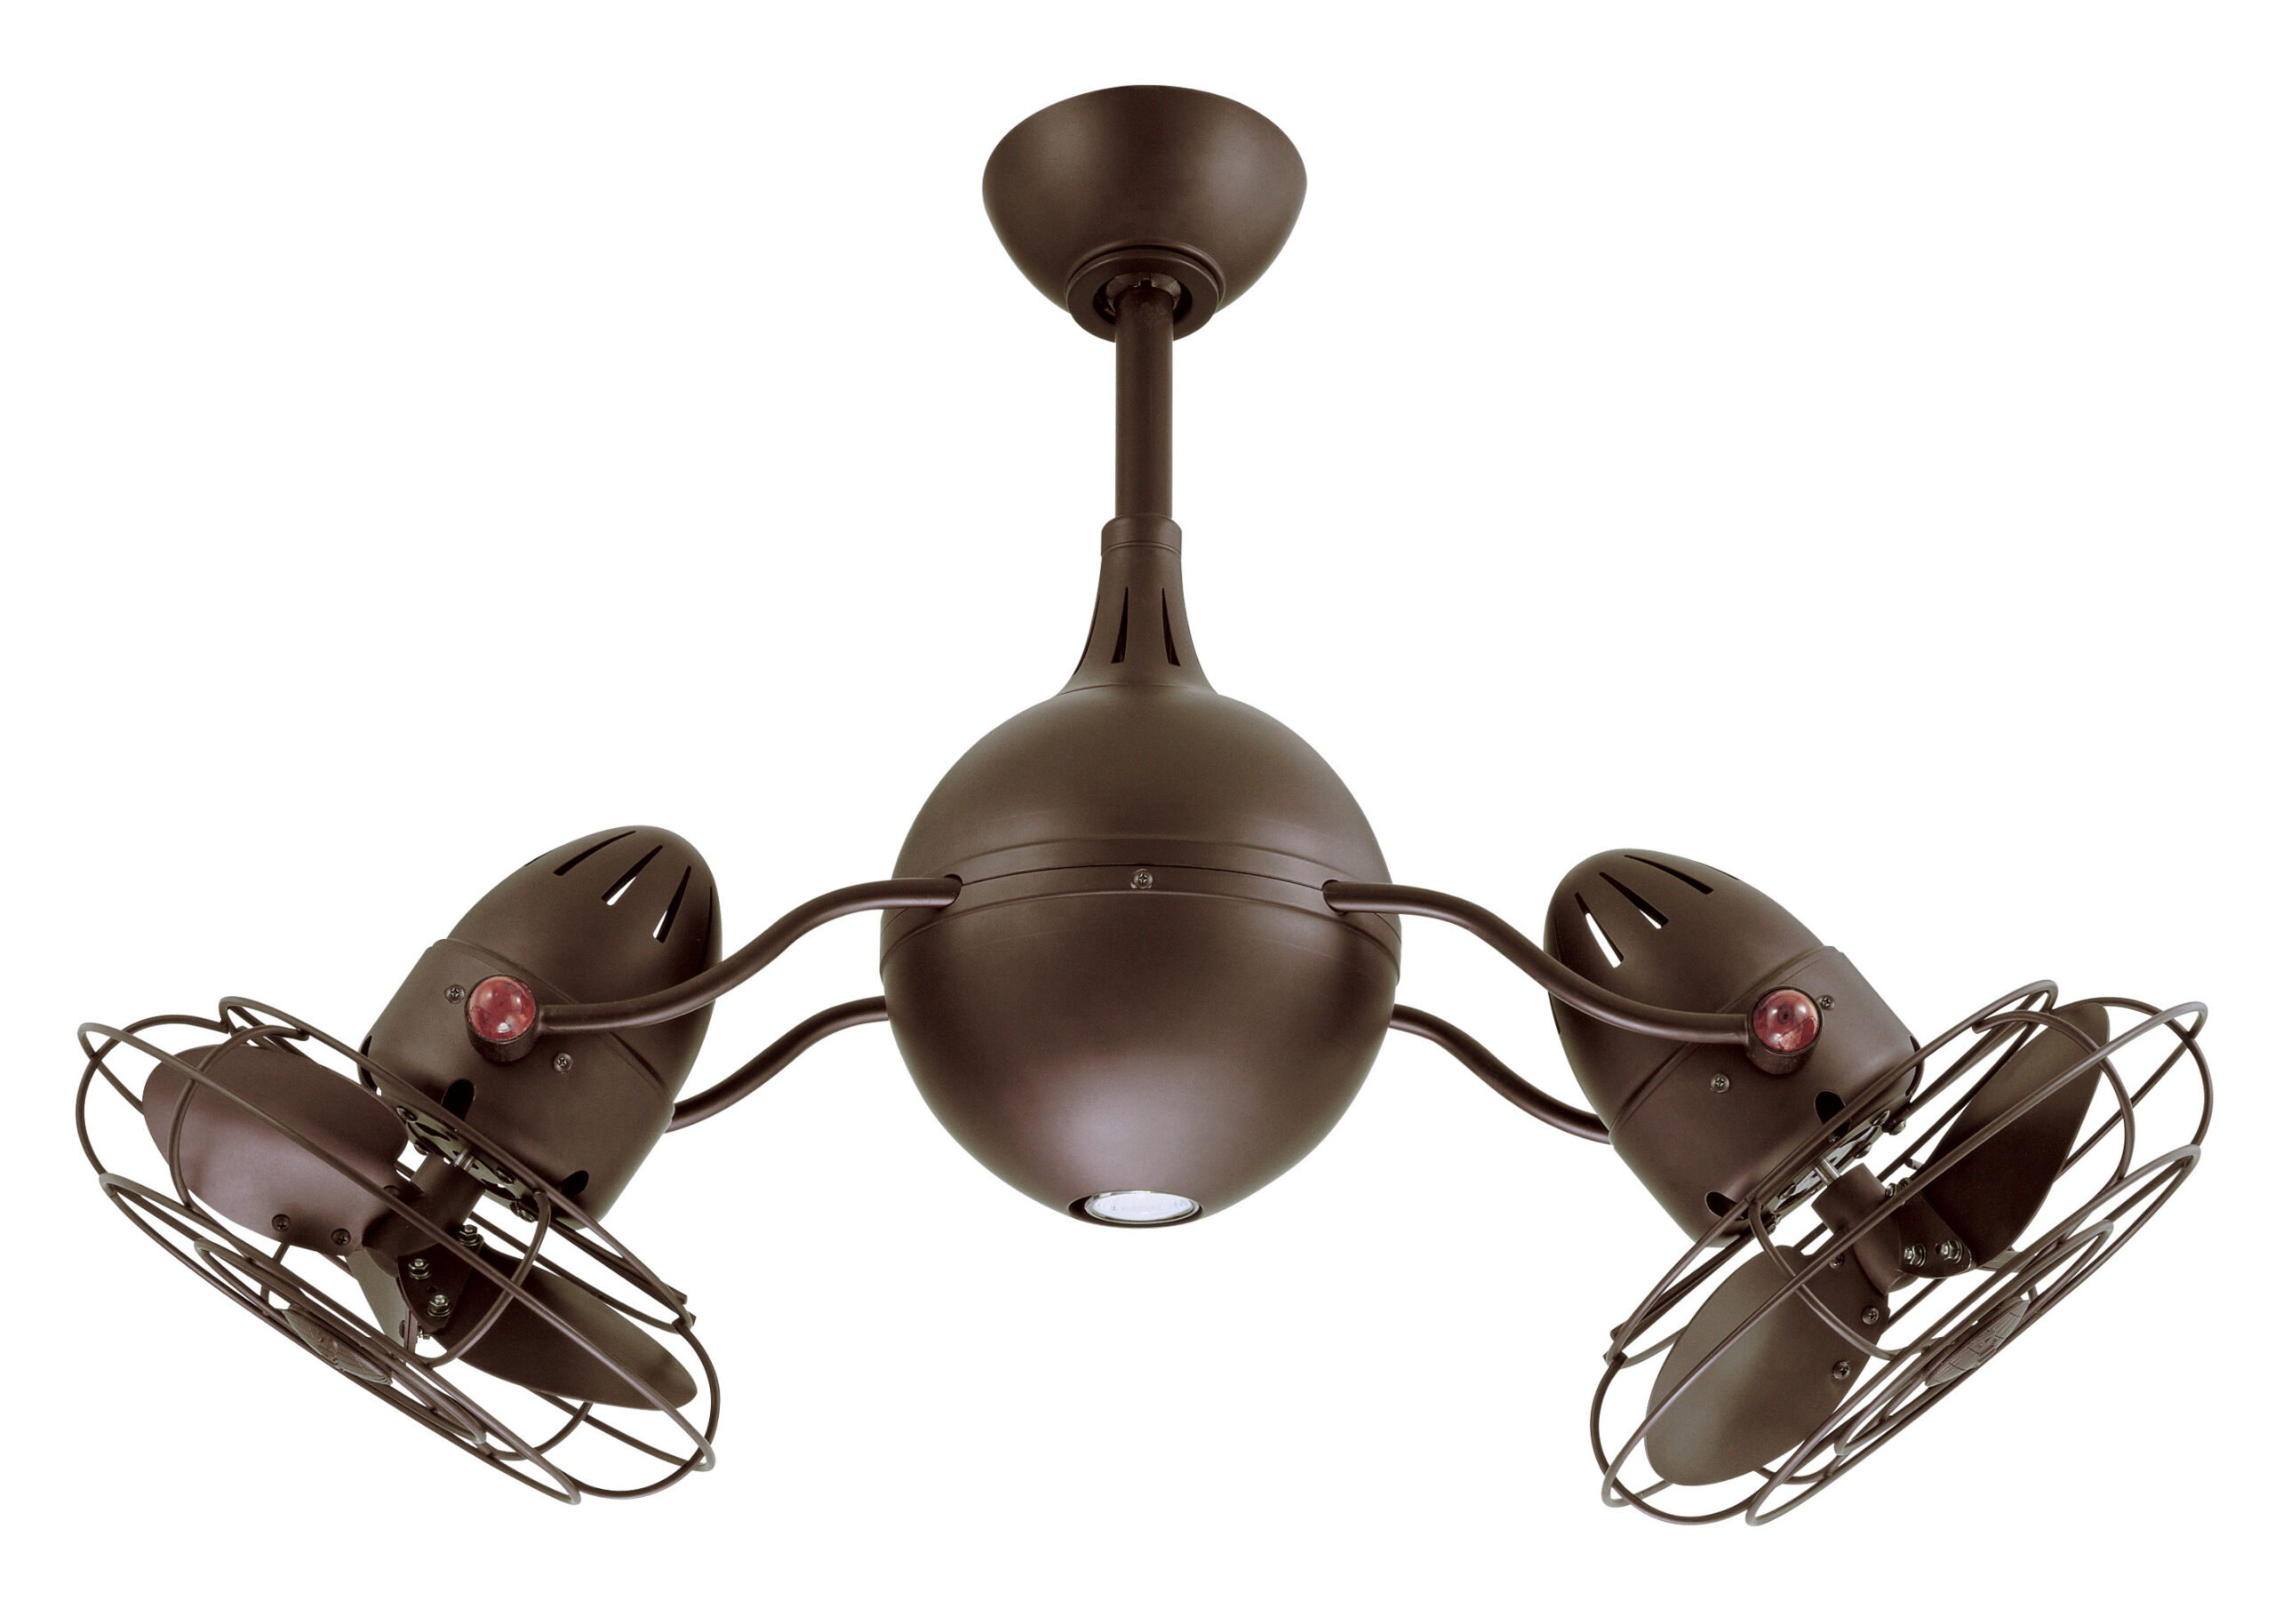 Acqua Rotational Ceiling Fan in Textured Bronze with Metal Blades